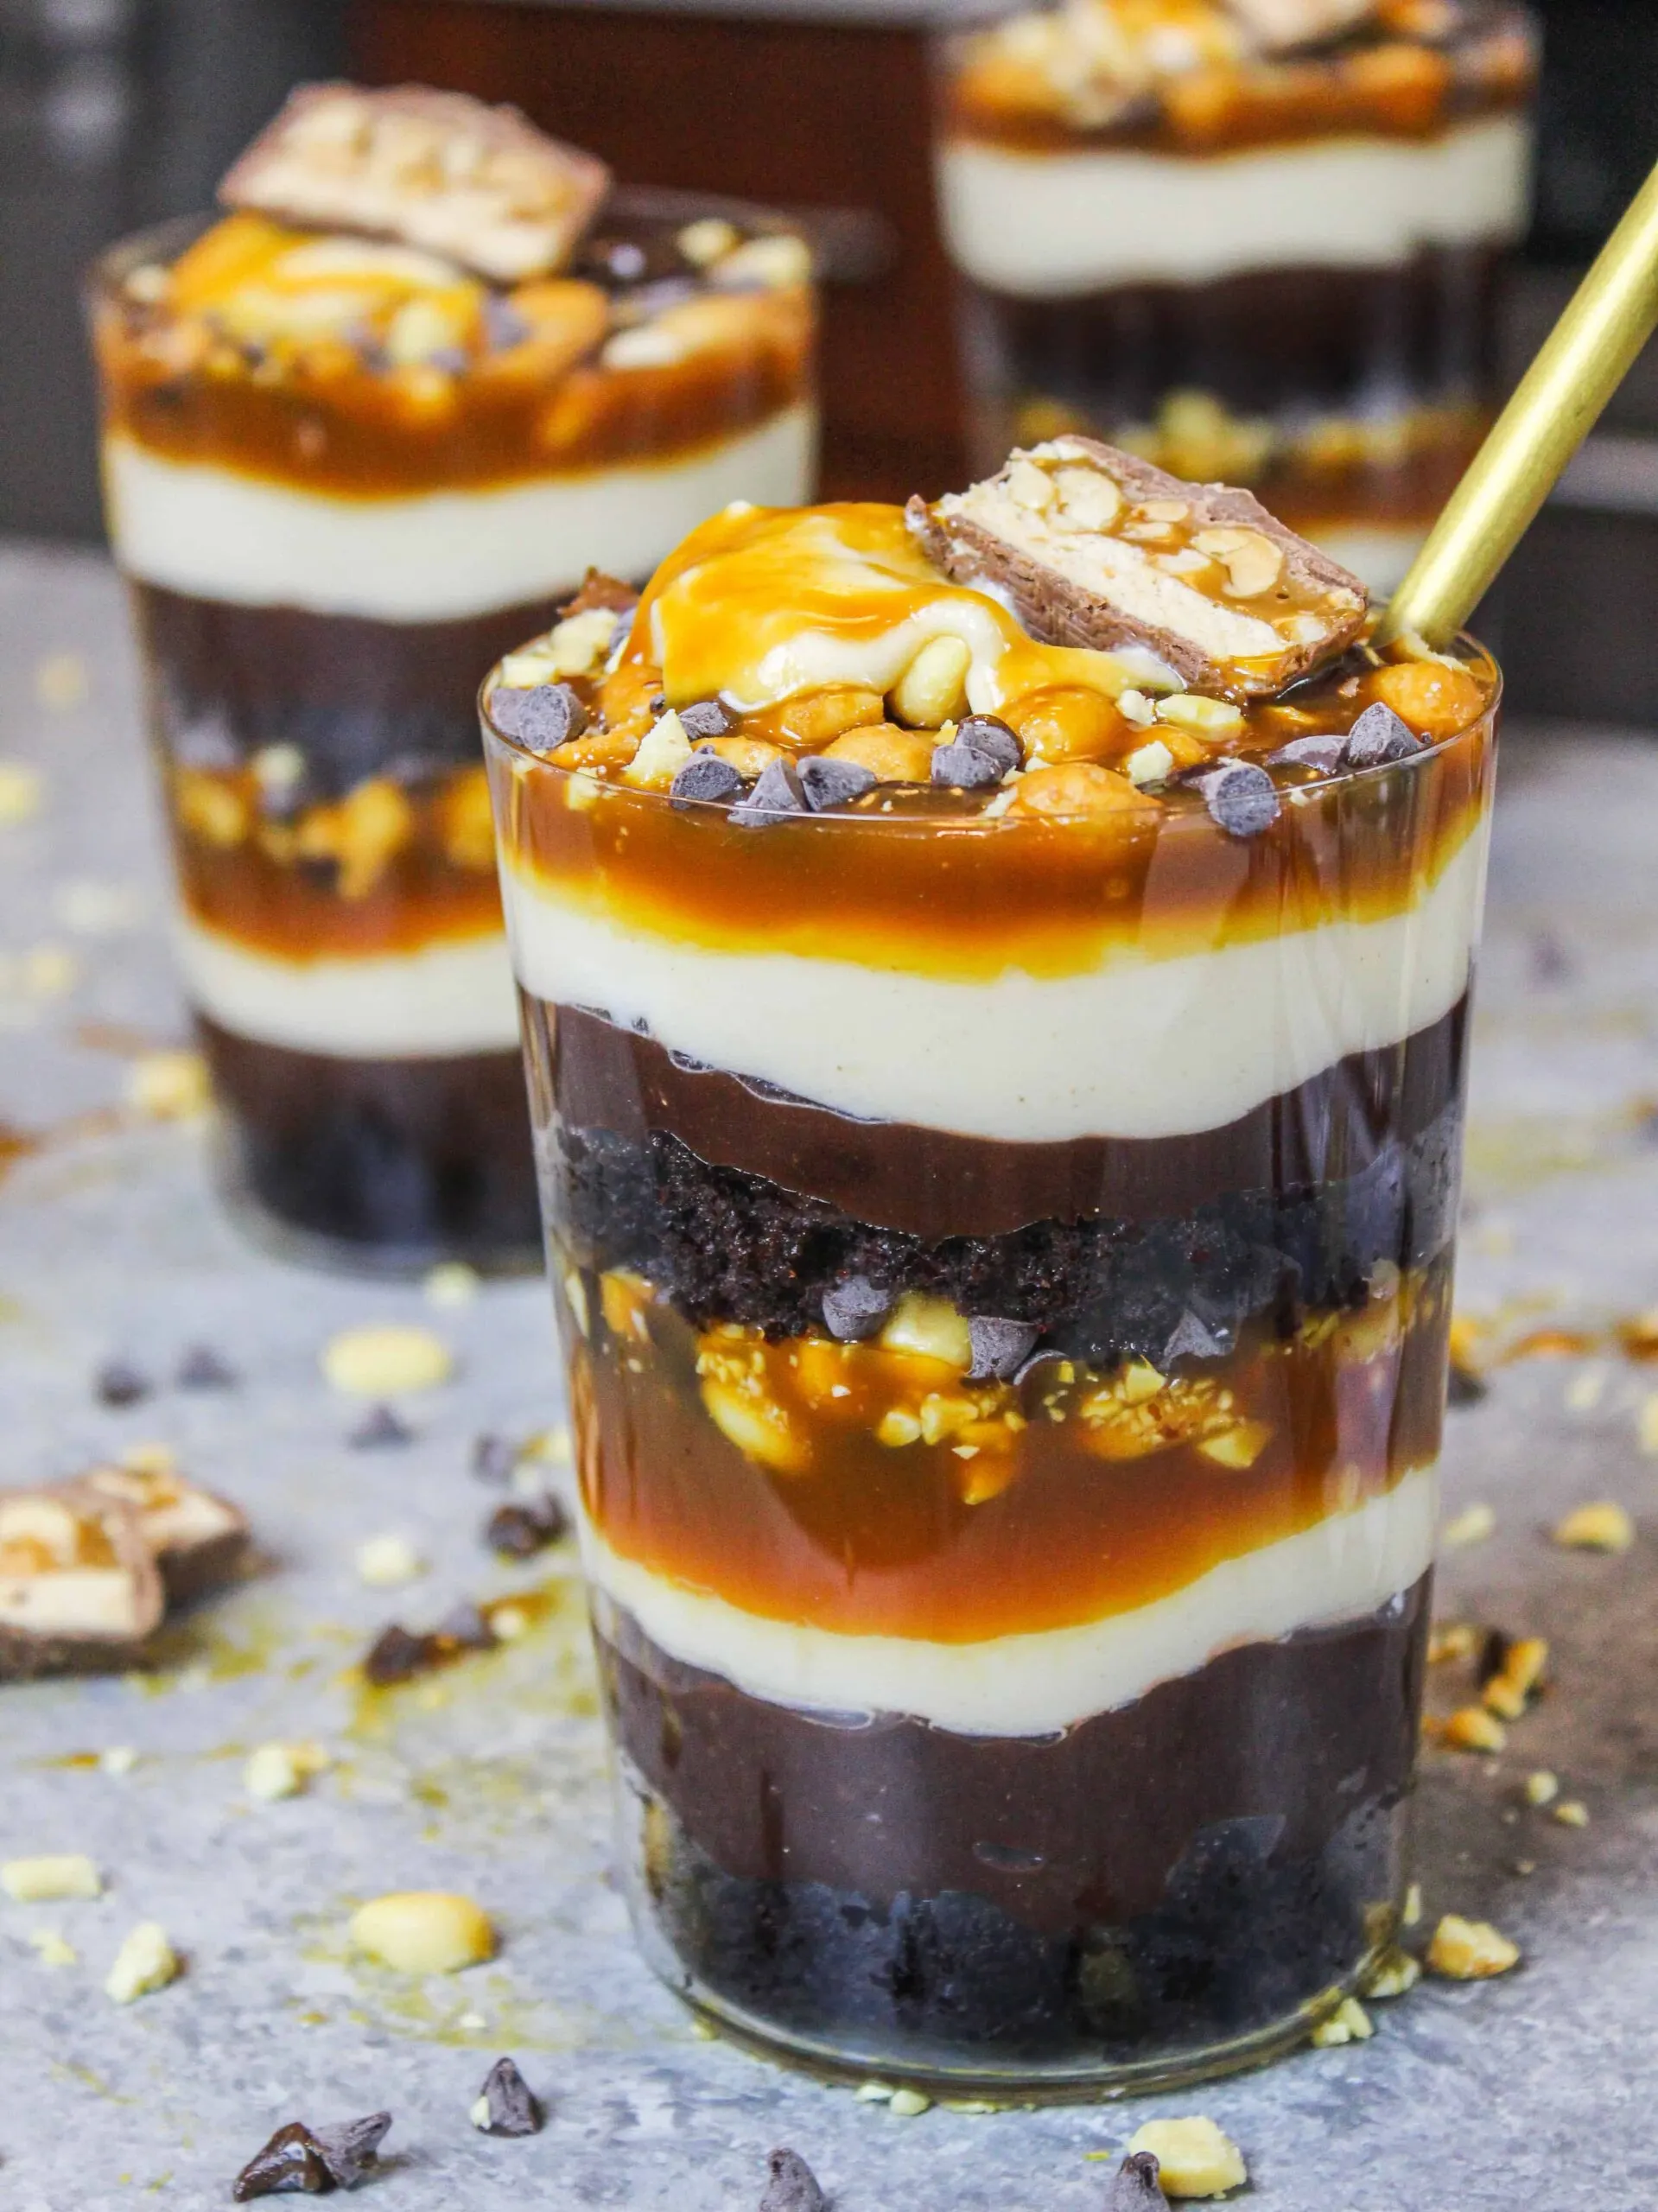 image of chocolate snickers trifle made in individual glasses to make them easy to serve and eat